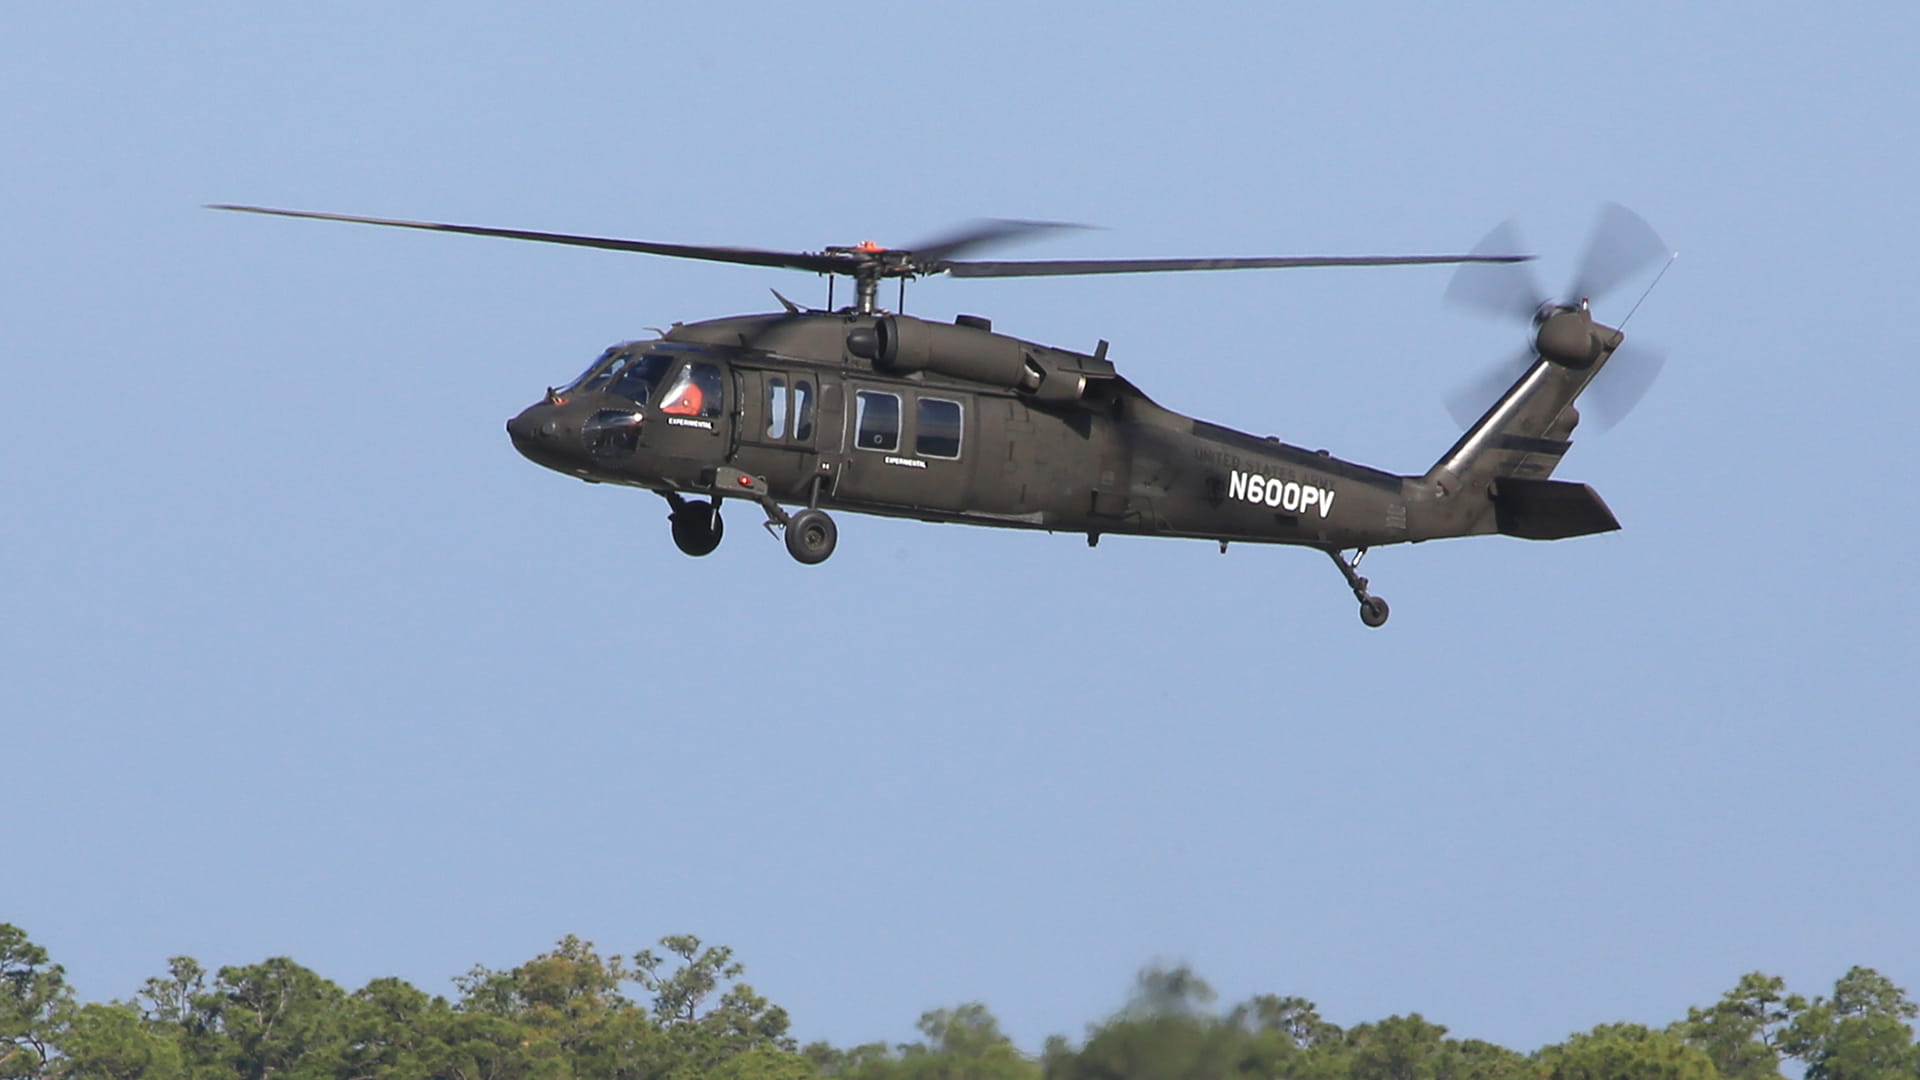 Black Hawk S70 helicopter